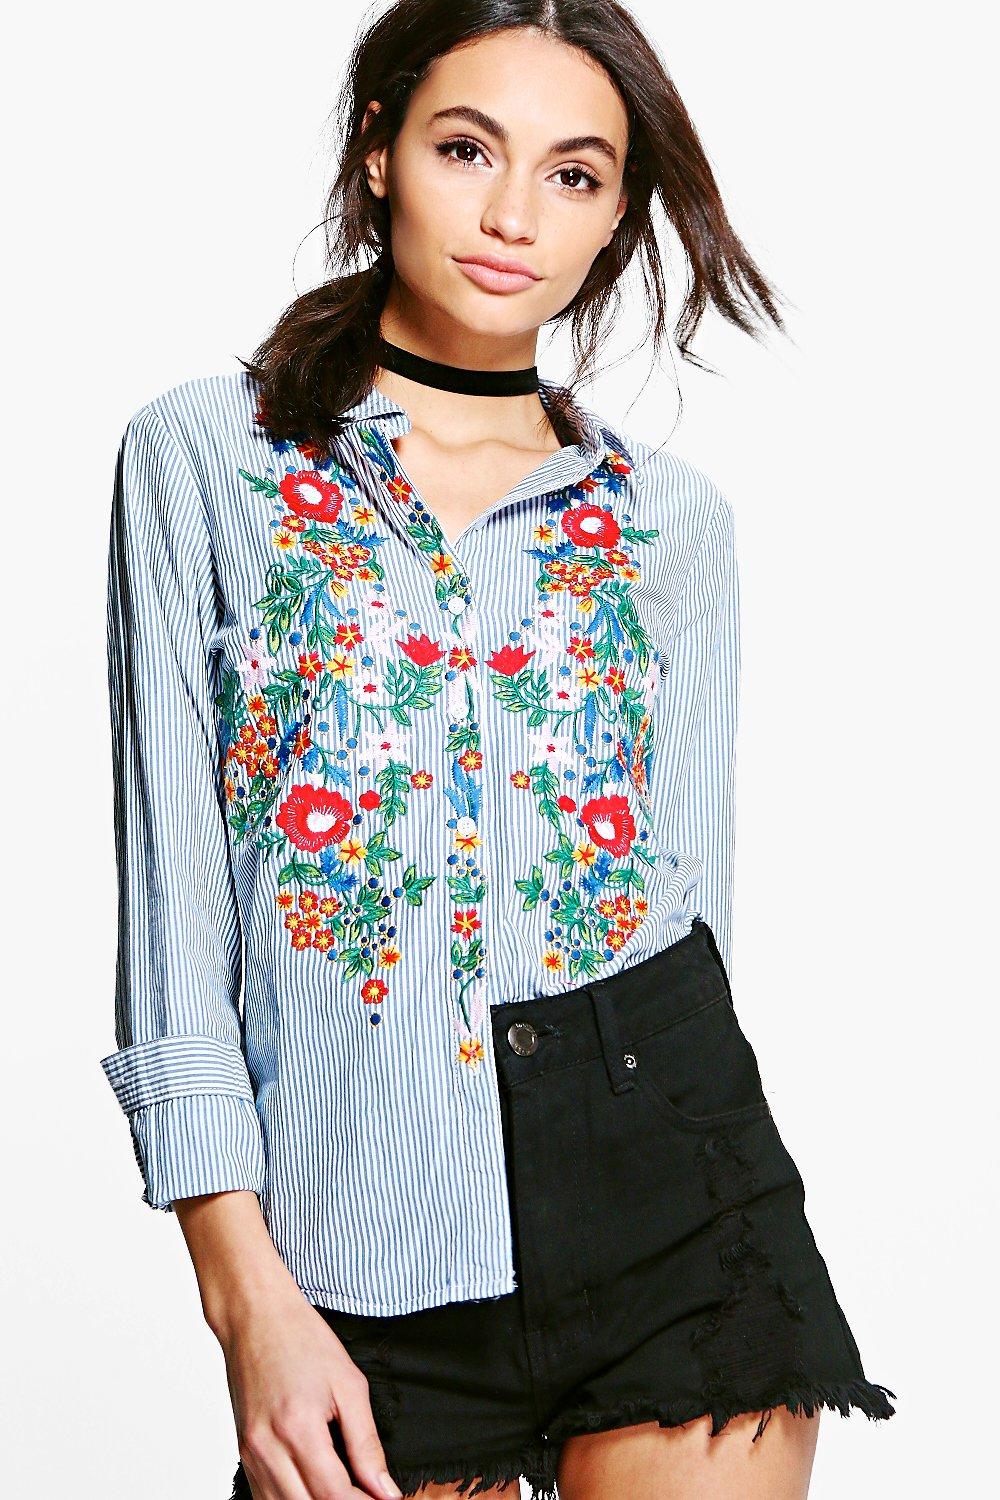 Liz Heavy Embroidered Front Stripe Shirt at boohoo.com